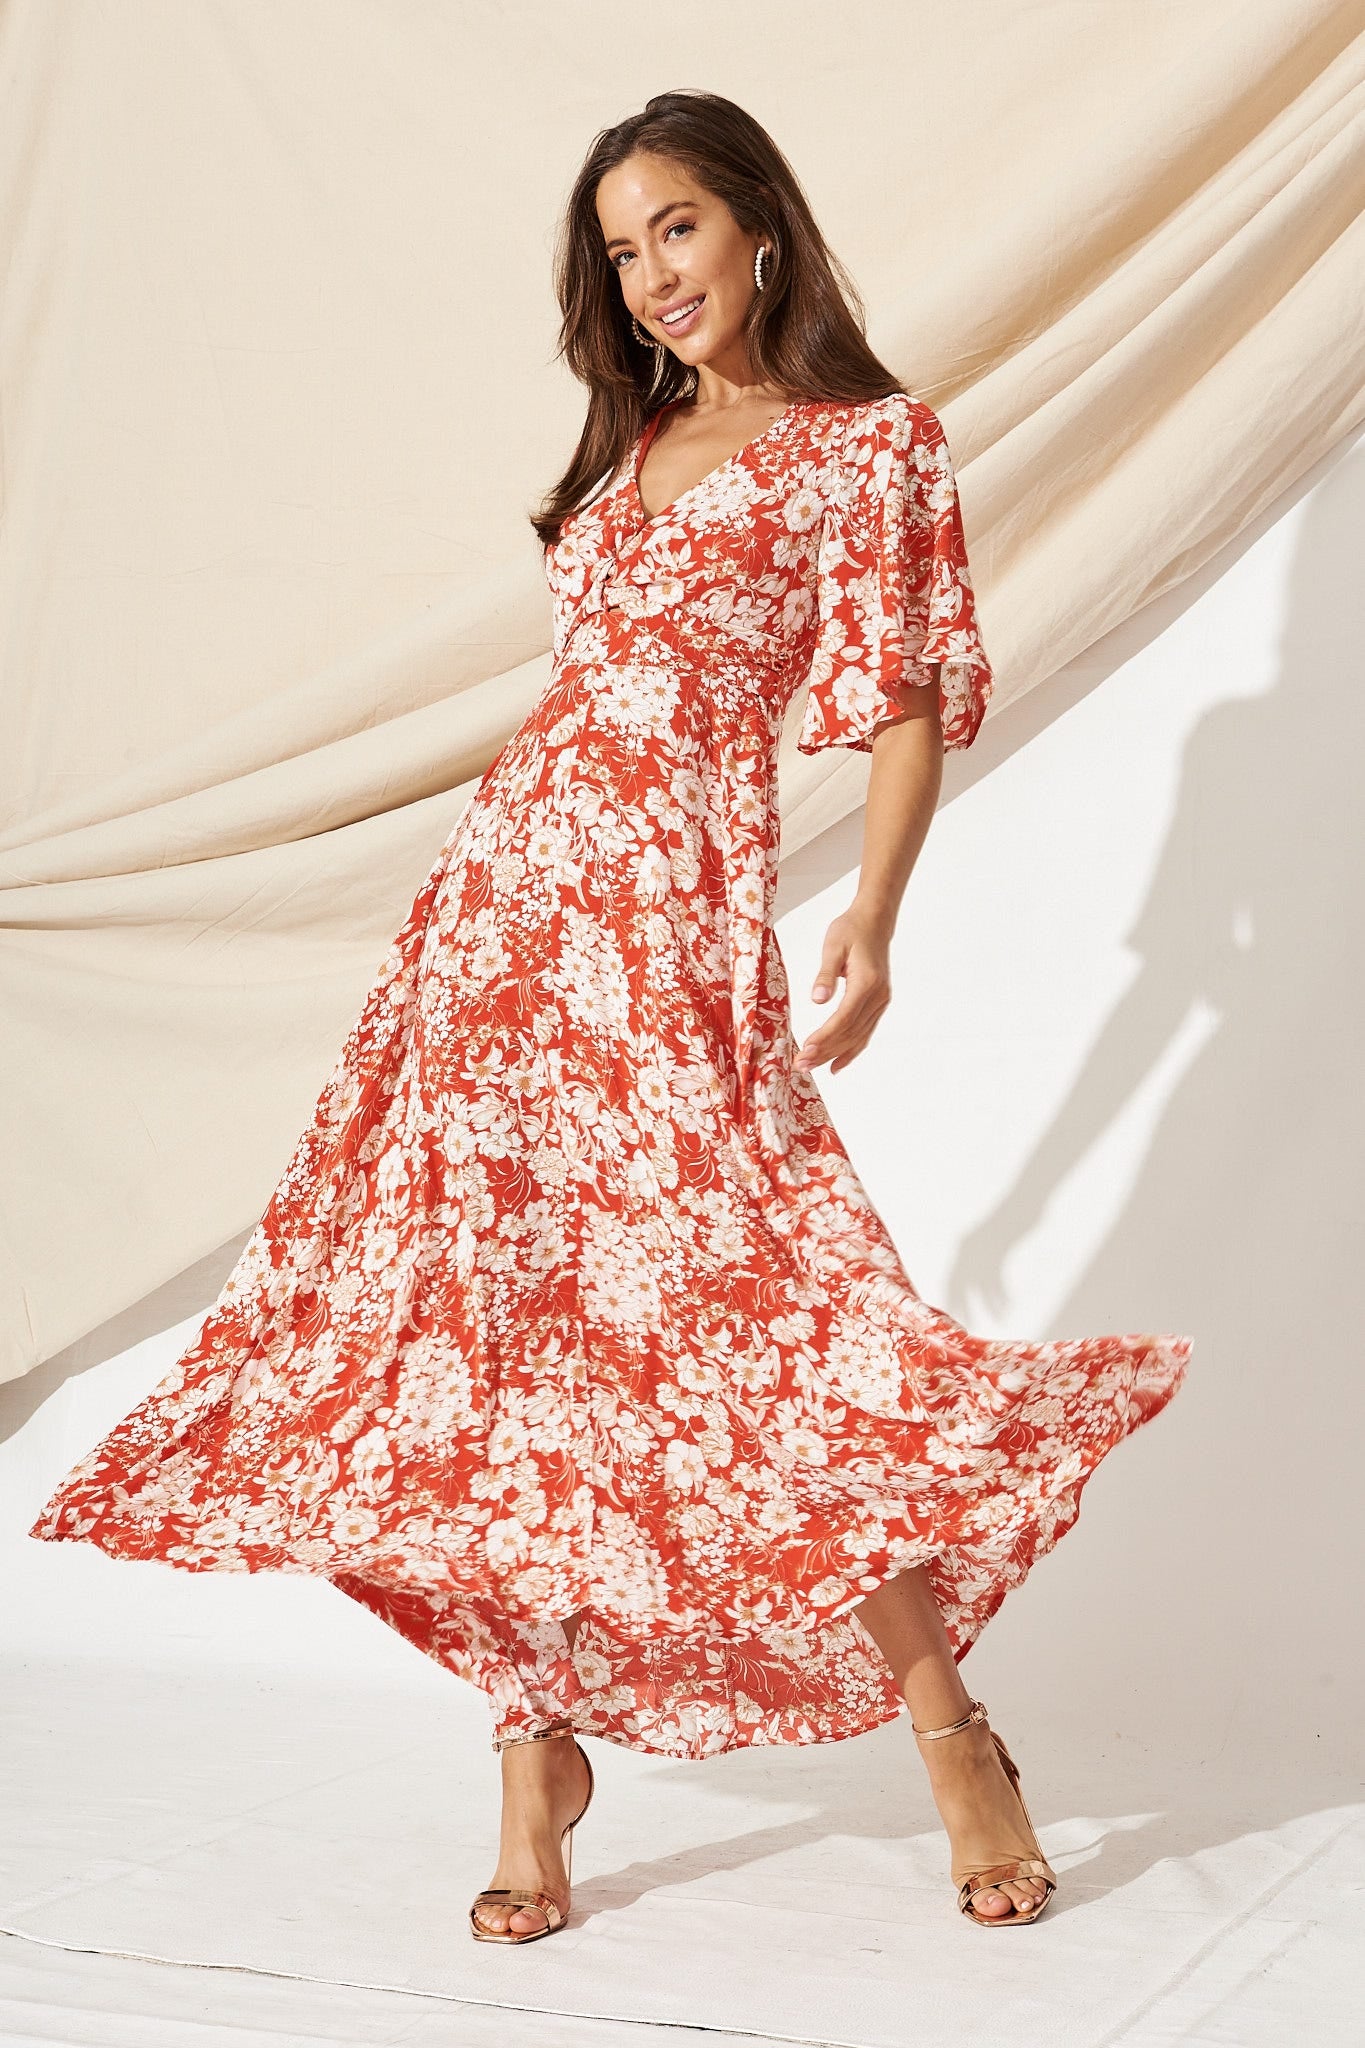 12 Beautiful Easter Dresses Worthy of Easter Brunch